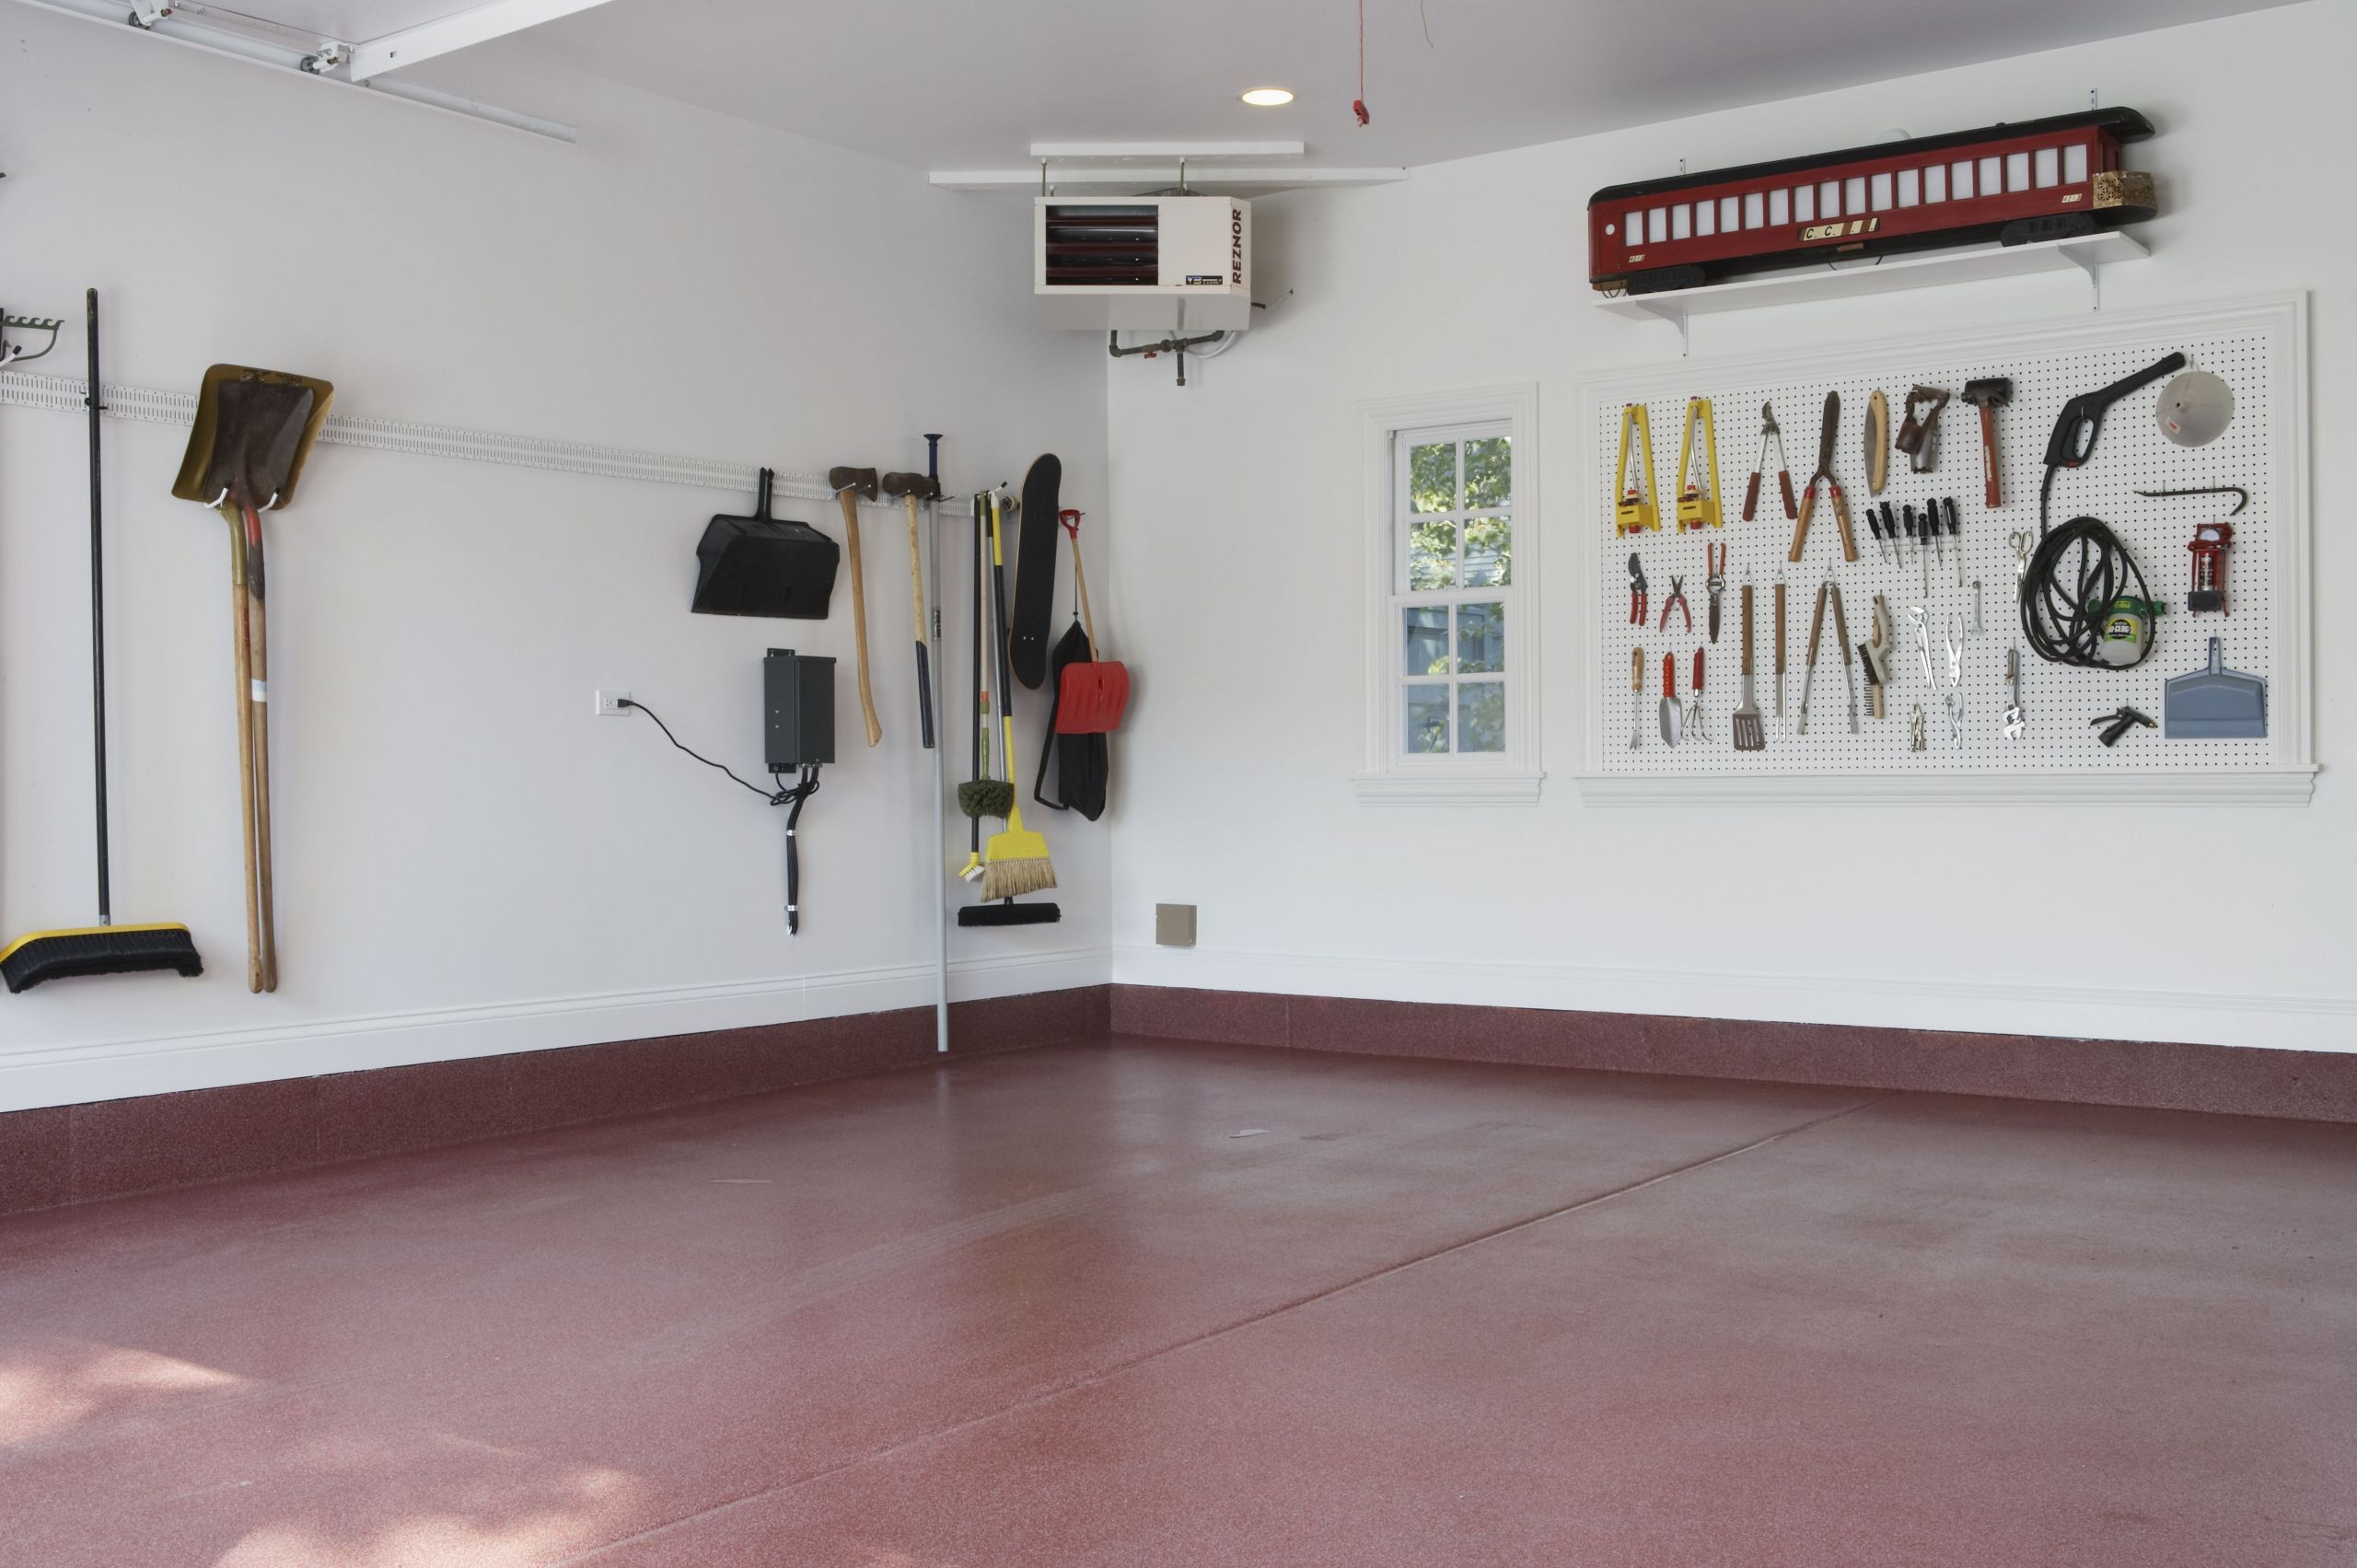 Garage Wall Organization Systems
 Before You Buy a Garage Wall System